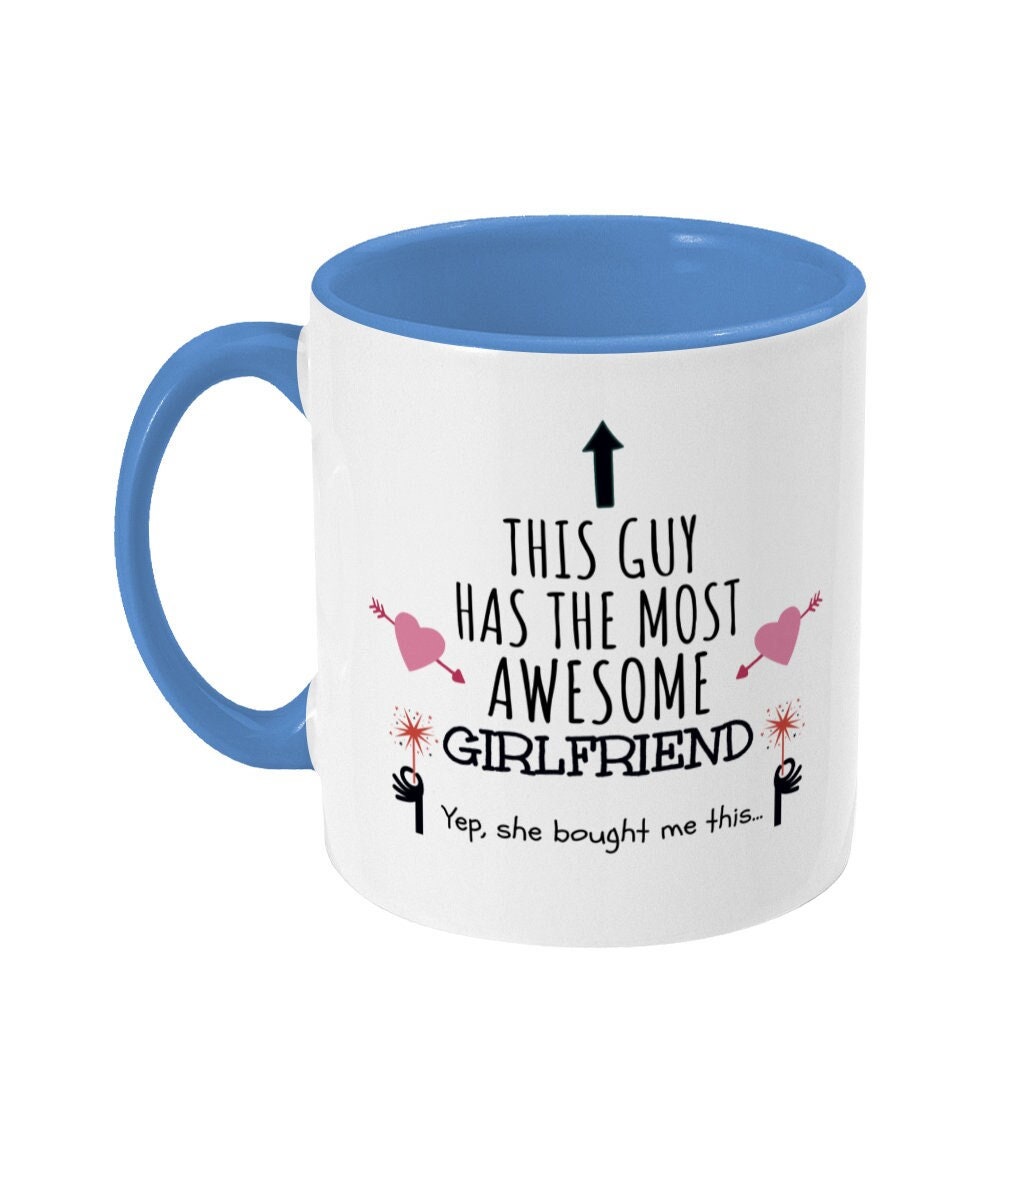 Gifts For Boyfriend, Gifts For BF, Presents For Boyfriend, Cute Gifts For  Boyfriend, Funny Gift For Boyfriend, Gifts For Partner, Funny Mug